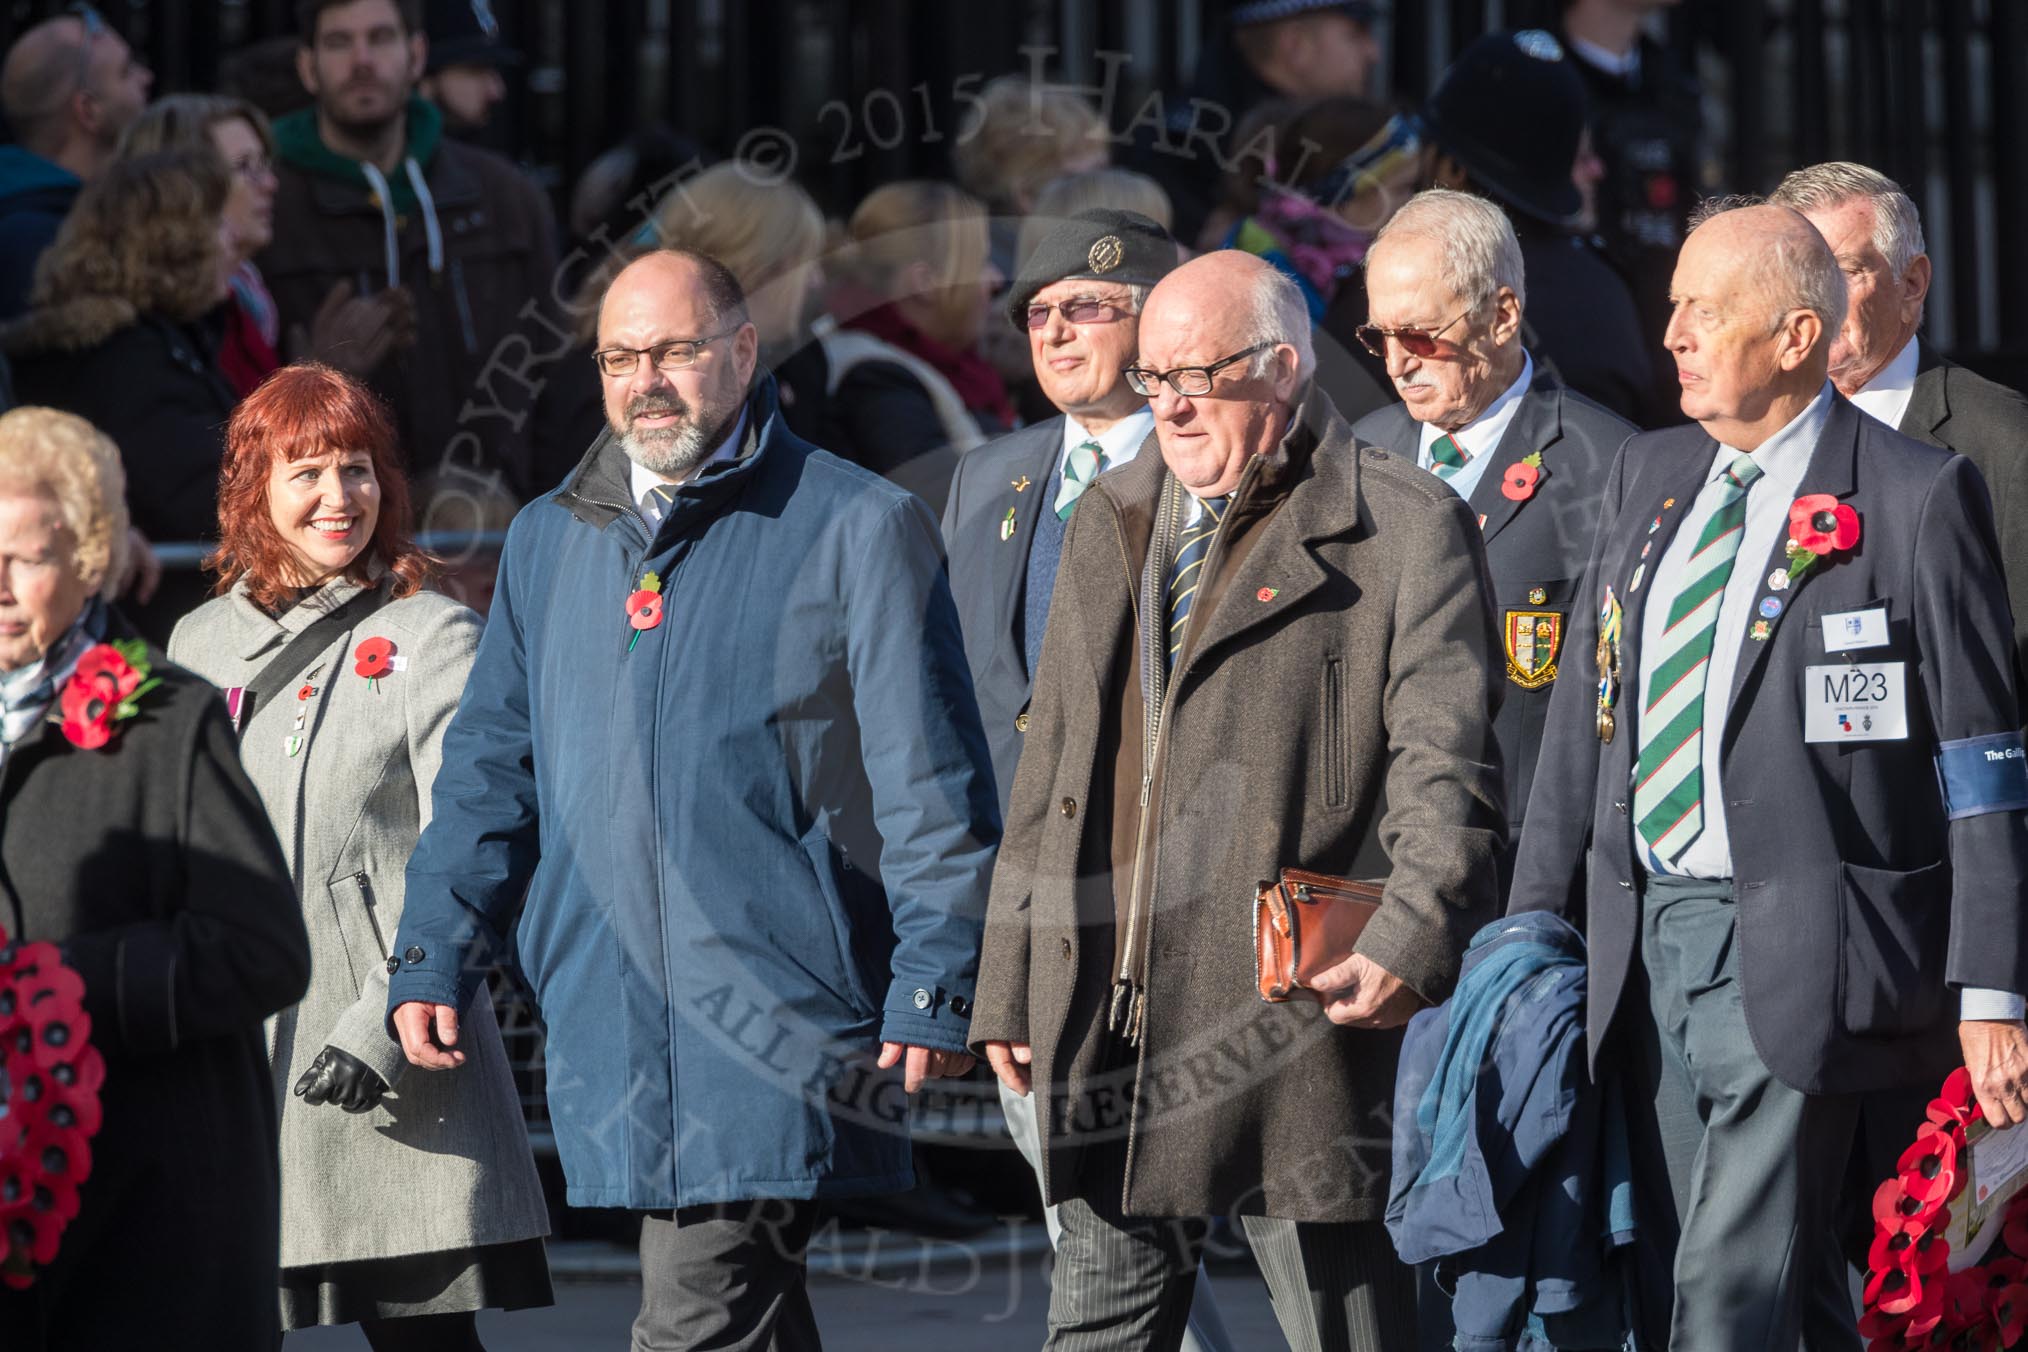 March Past, Remembrance Sunday at the Cenotaph 2016: M23 Gallipoli Association.
Cenotaph, Whitehall, London SW1,
London,
Greater London,
United Kingdom,
on 13 November 2016 at 13:16, image #2689